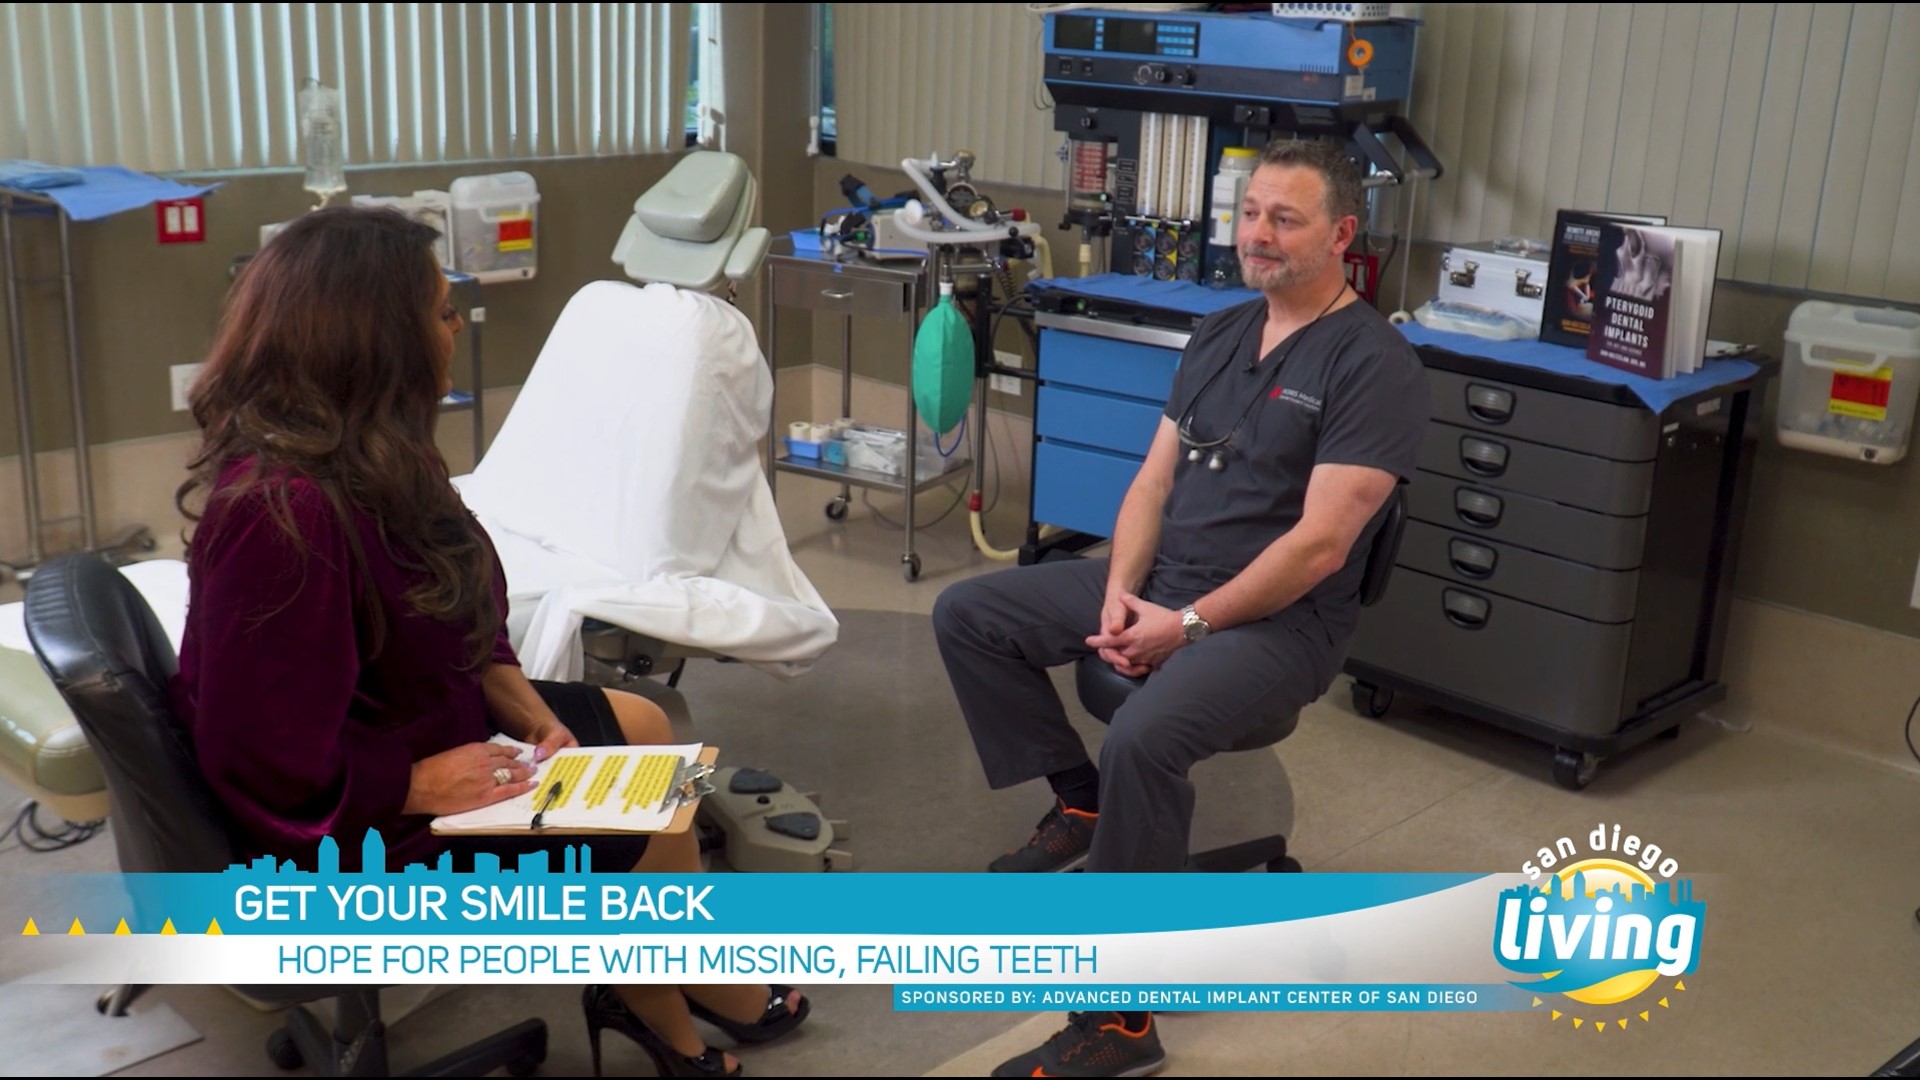 Hope for People with Missing, Failing Teeth. Sponsored by Advanced Dental Implant Center